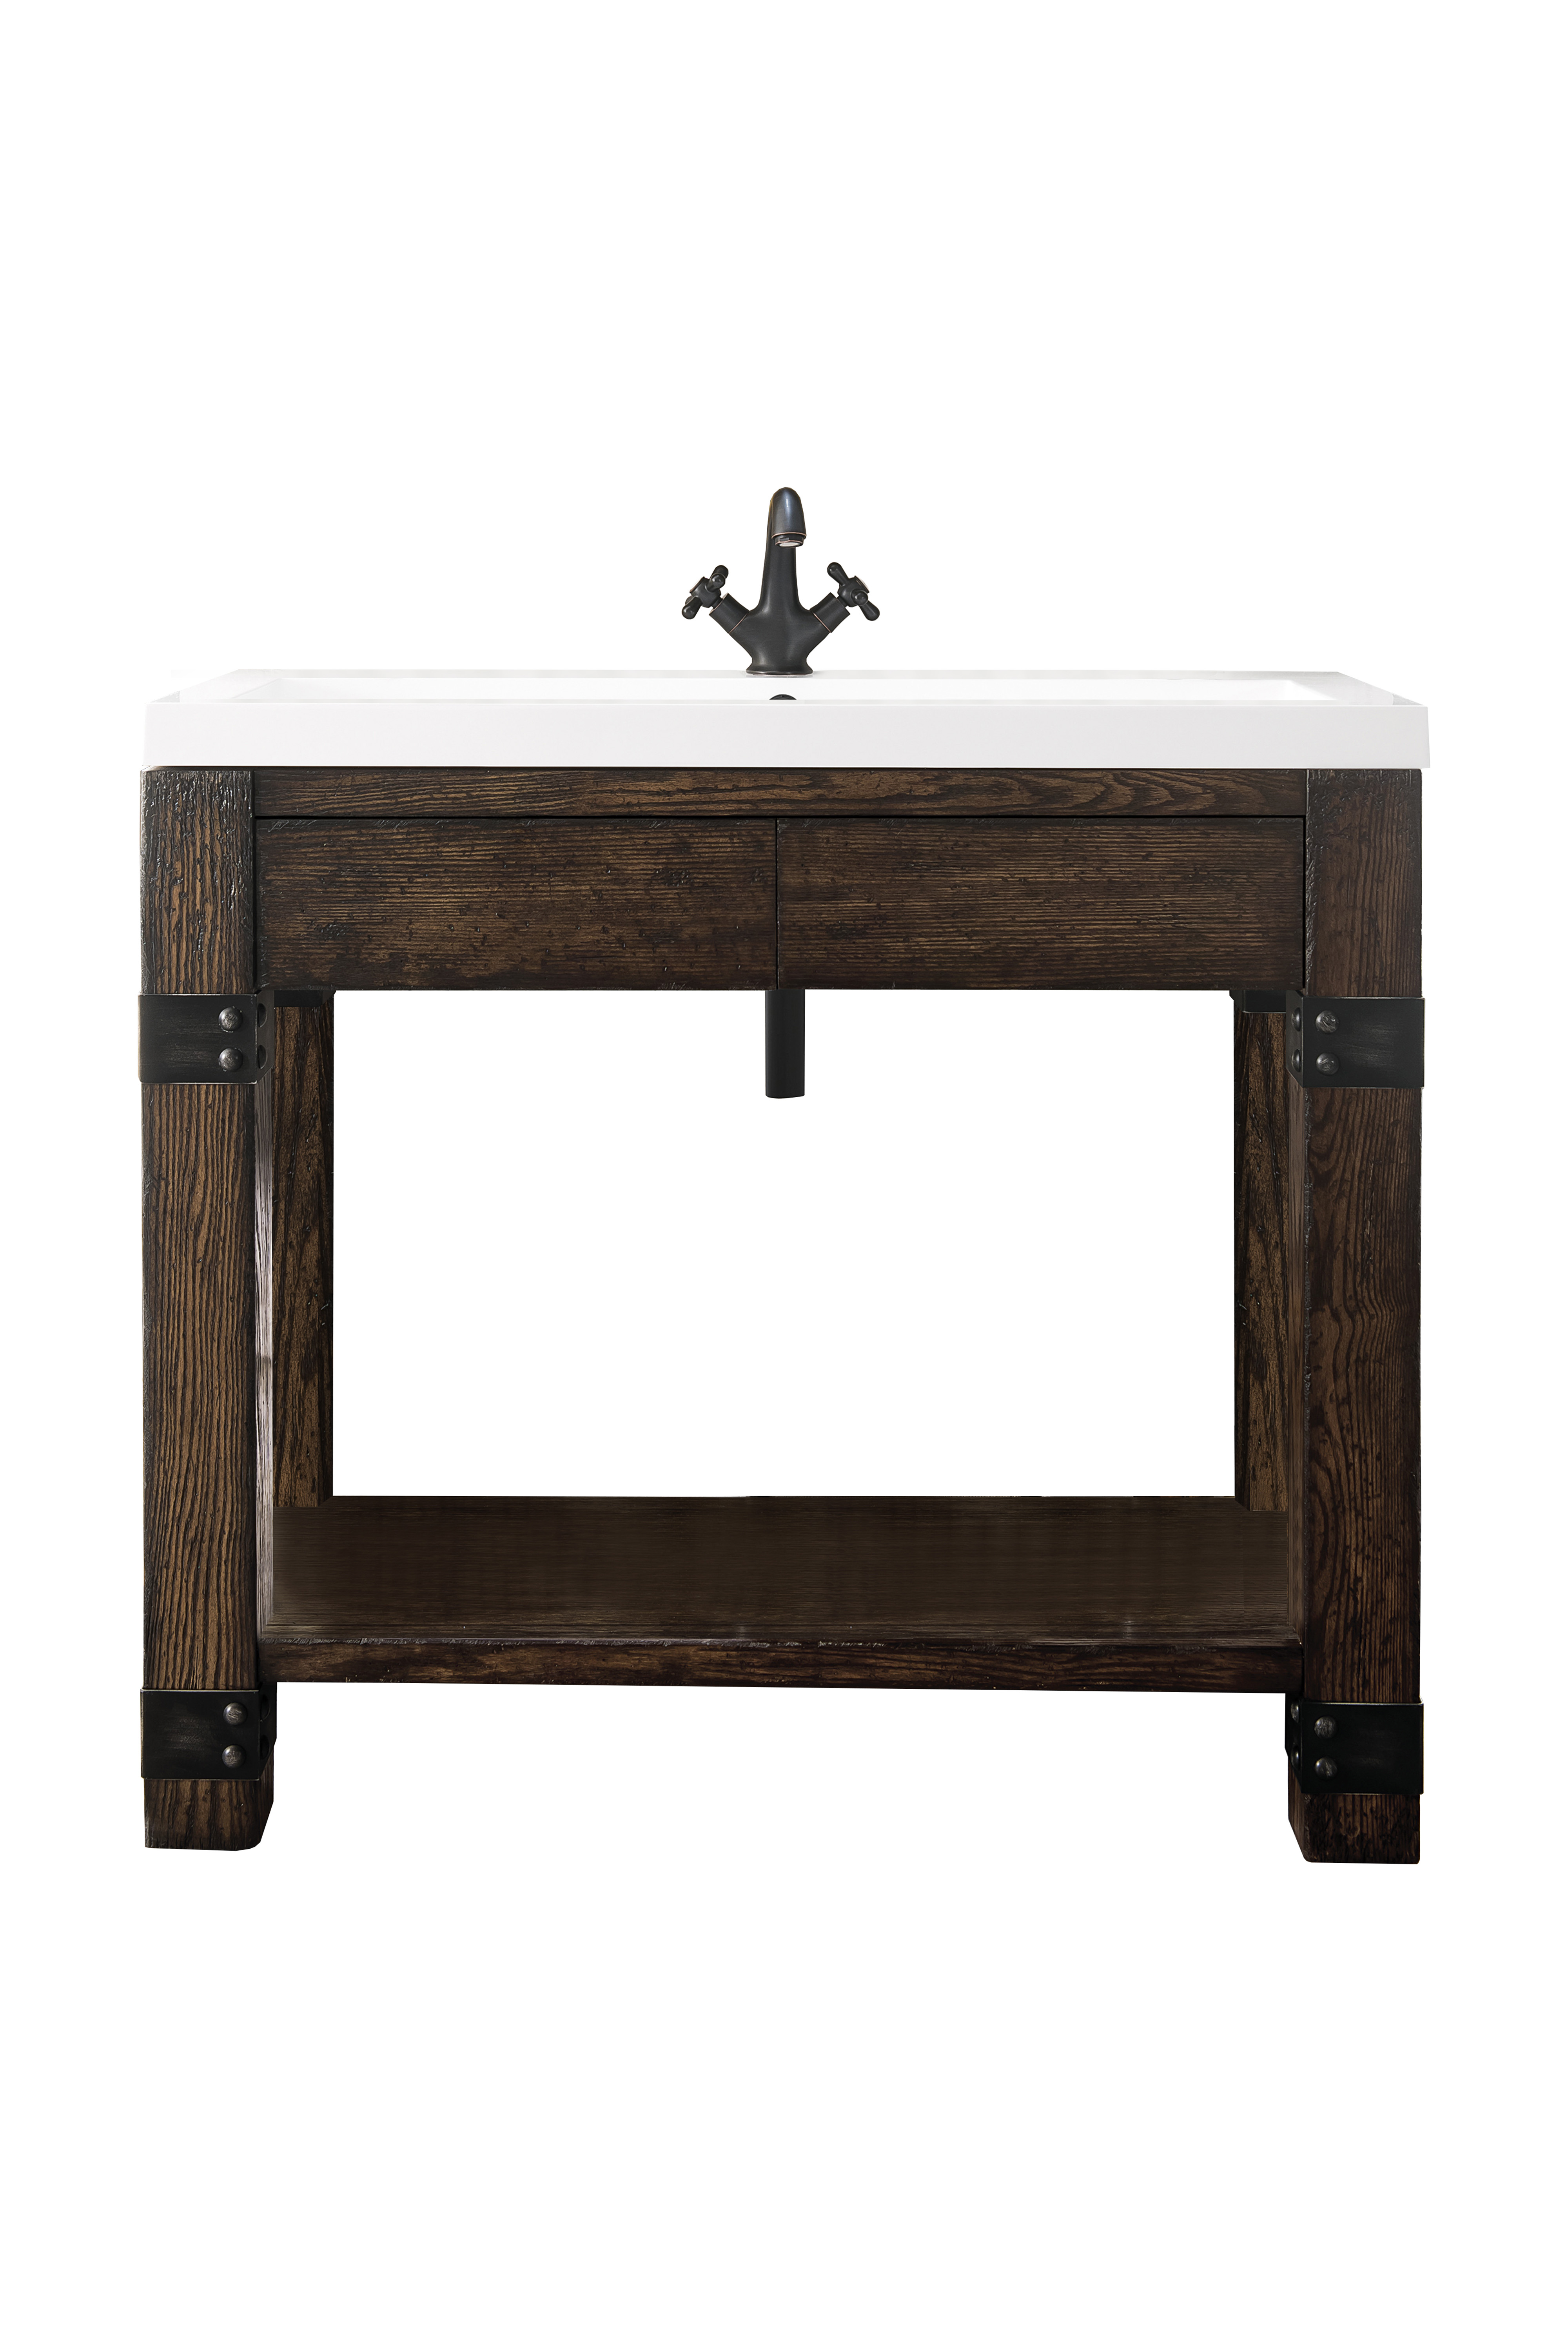 James Martin C205V39.5RSAWG Brooklyn 39.5" Wooden Sink Console, Rustic Ash w/ White Glossy Composite Countertop